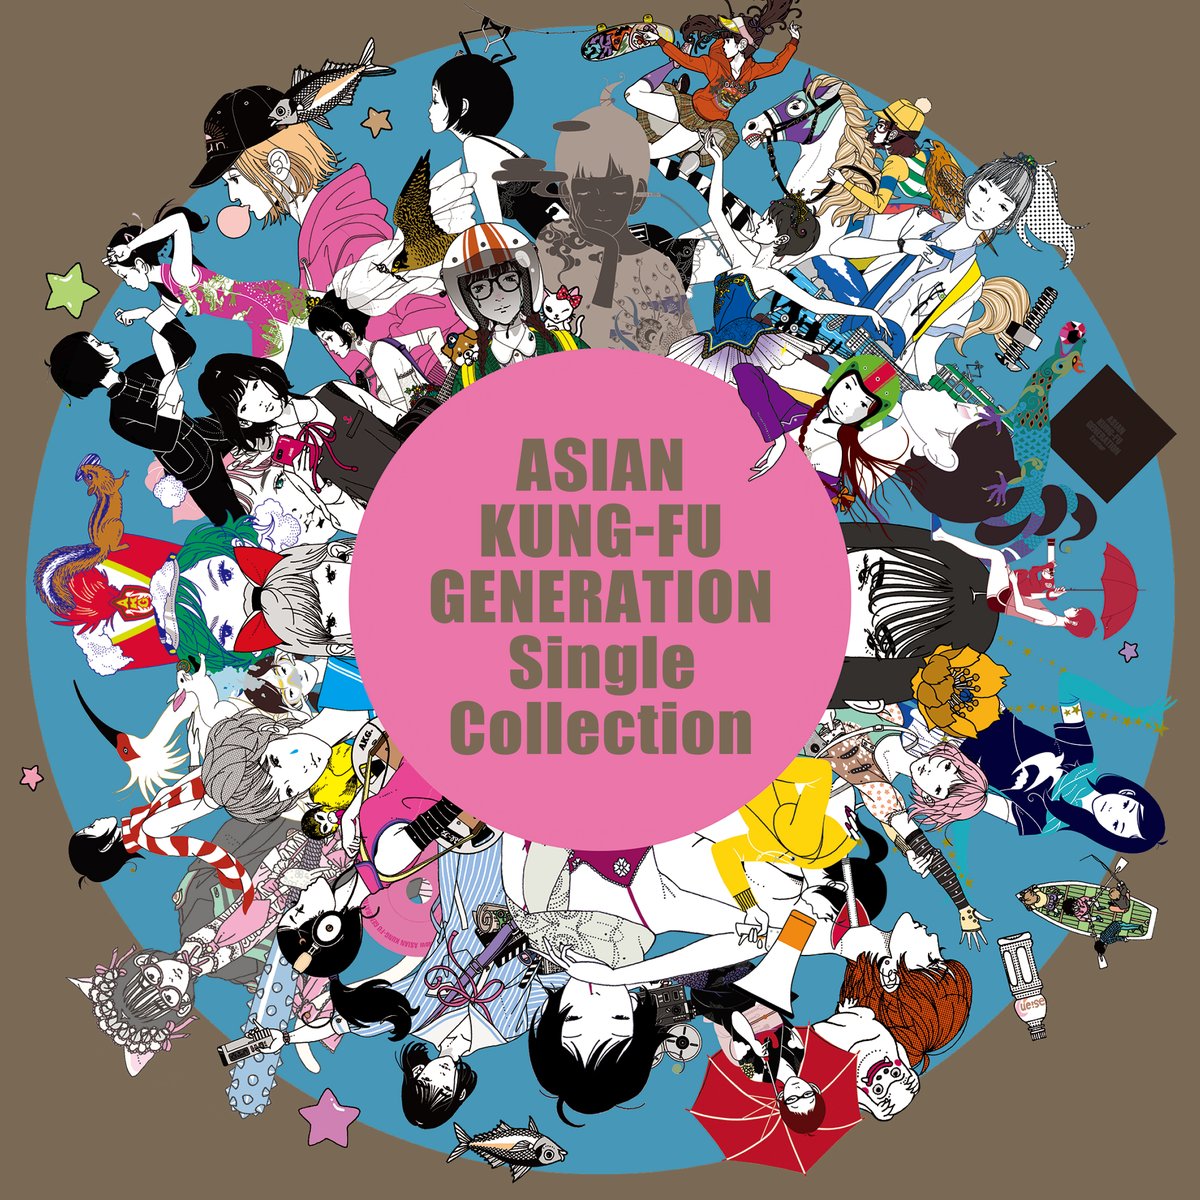 New release from Asian Kung-Fu Generation